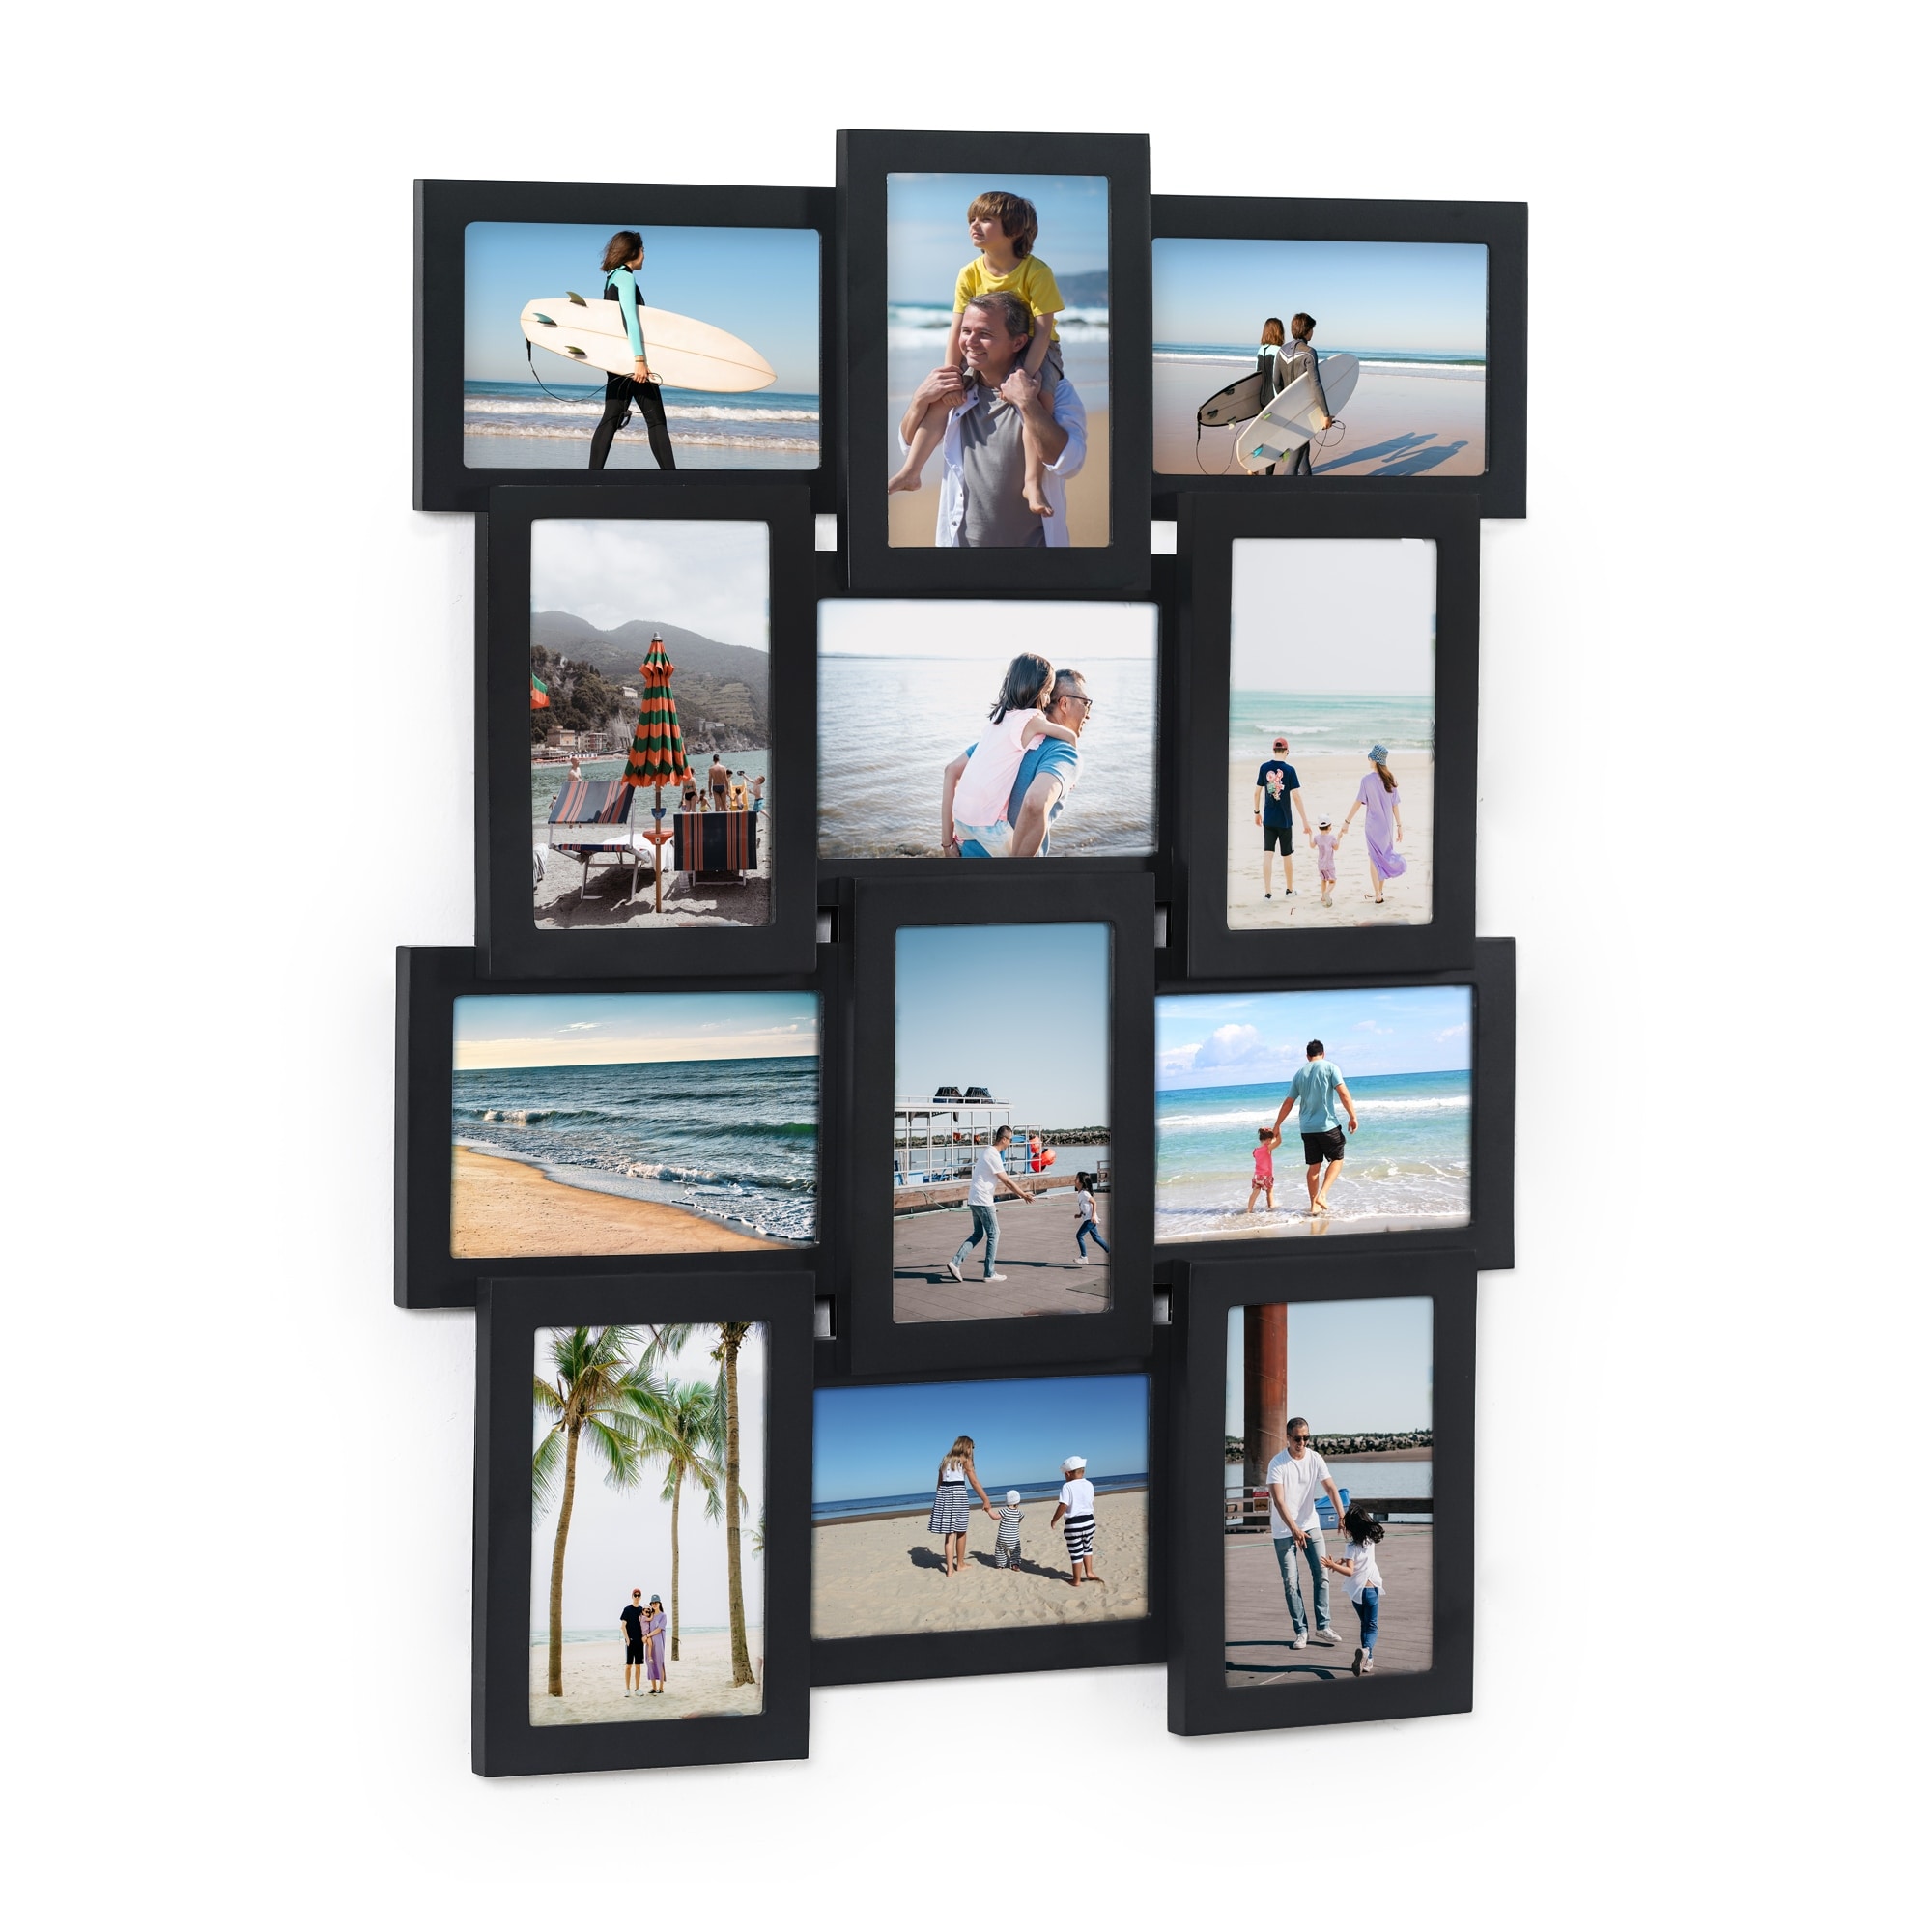 https://ak1.ostkcdn.com/images/products/is/images/direct/c80baef3c66bccd7ce01031d2f411fd965f73717/Adeco-Black-Wood-12-opening-Collage-Photo-Frame.jpg